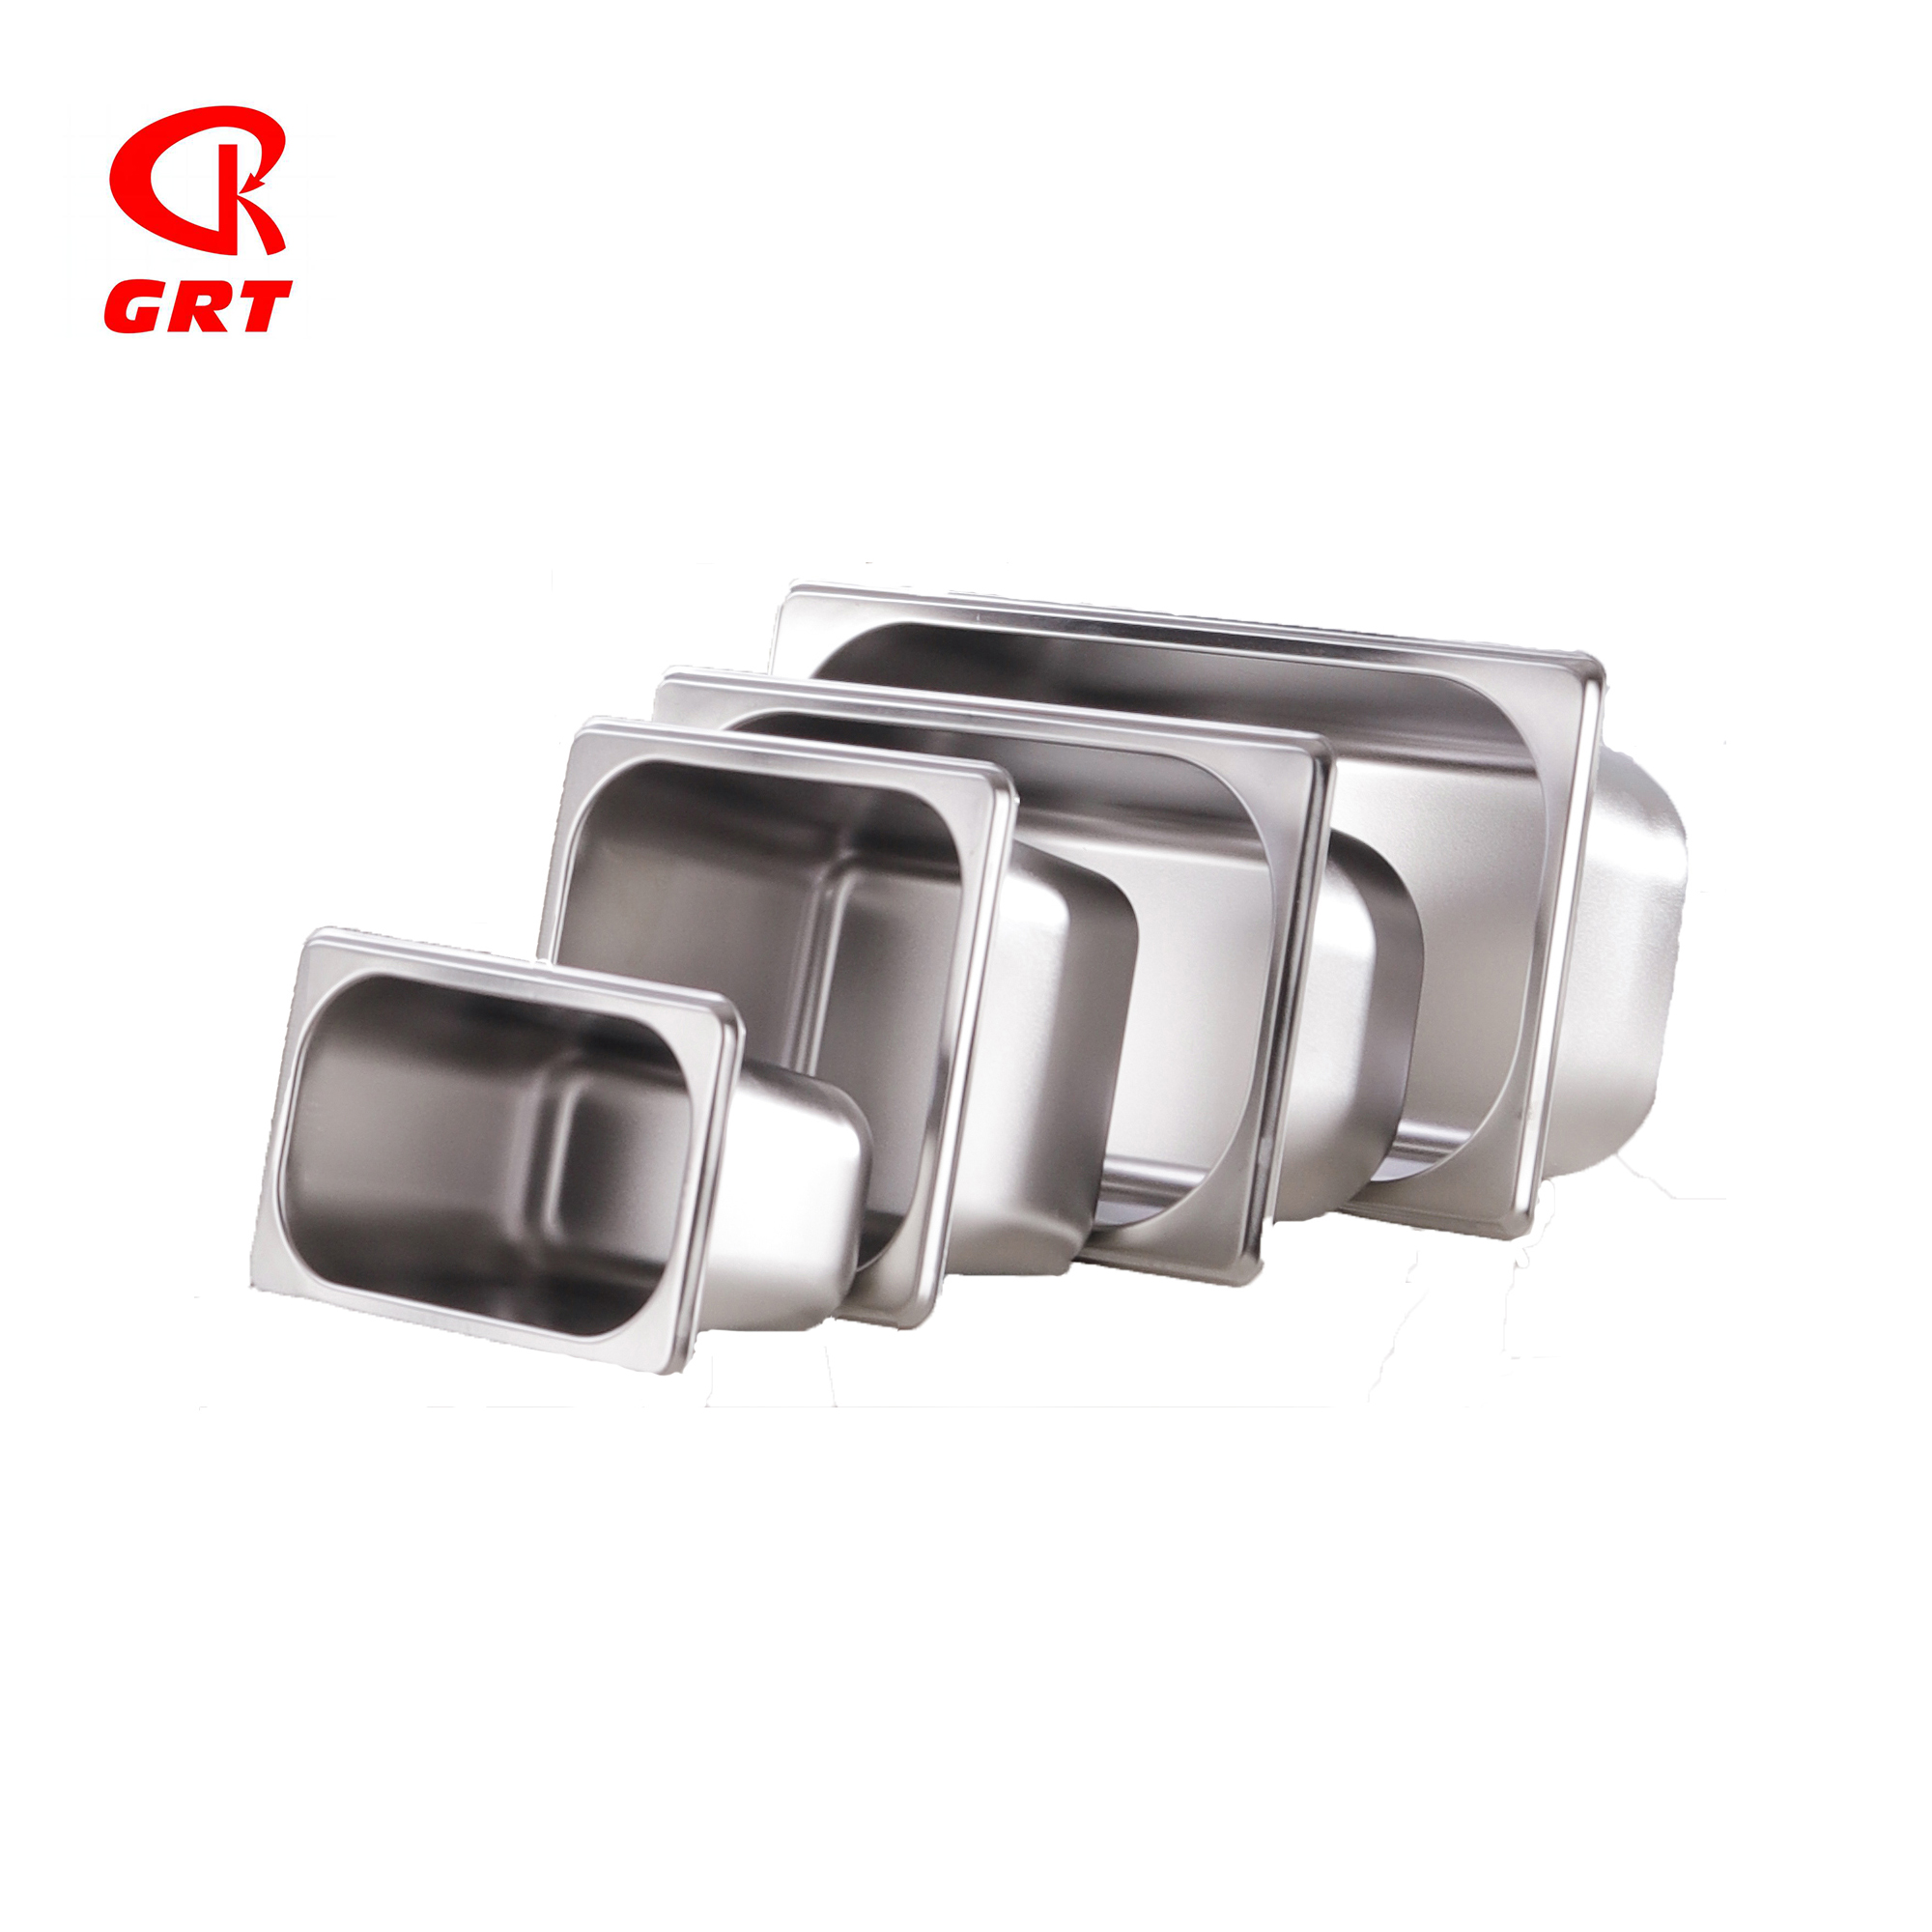 0.6/0.7mm 1/3 American GN Container 25/60/150/200mm High Stainless Steel Food Pan 